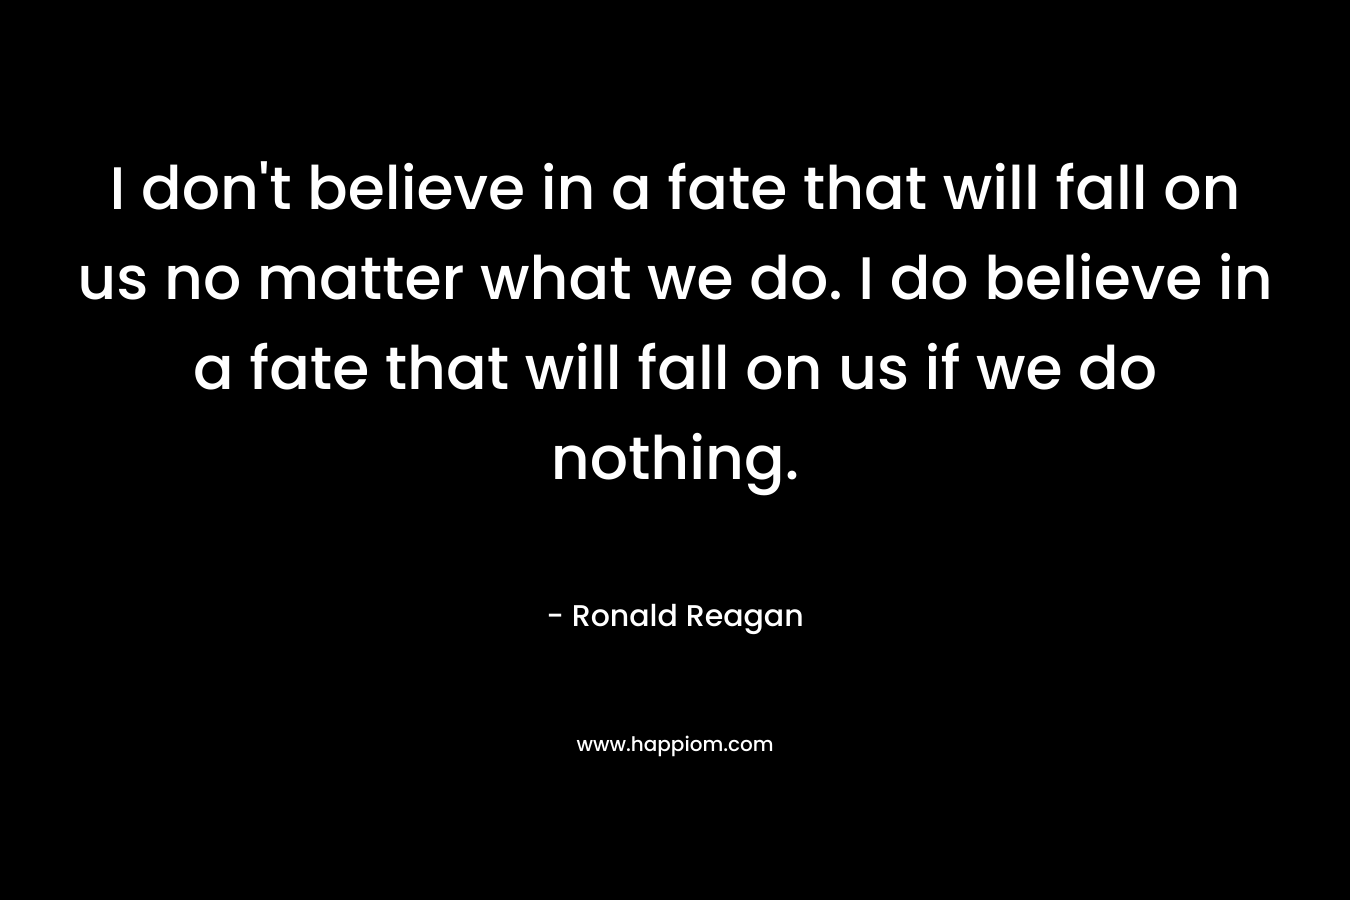 I don't believe in a fate that will fall on us no matter what we do. I do believe in a fate that will fall on us if we do nothing.